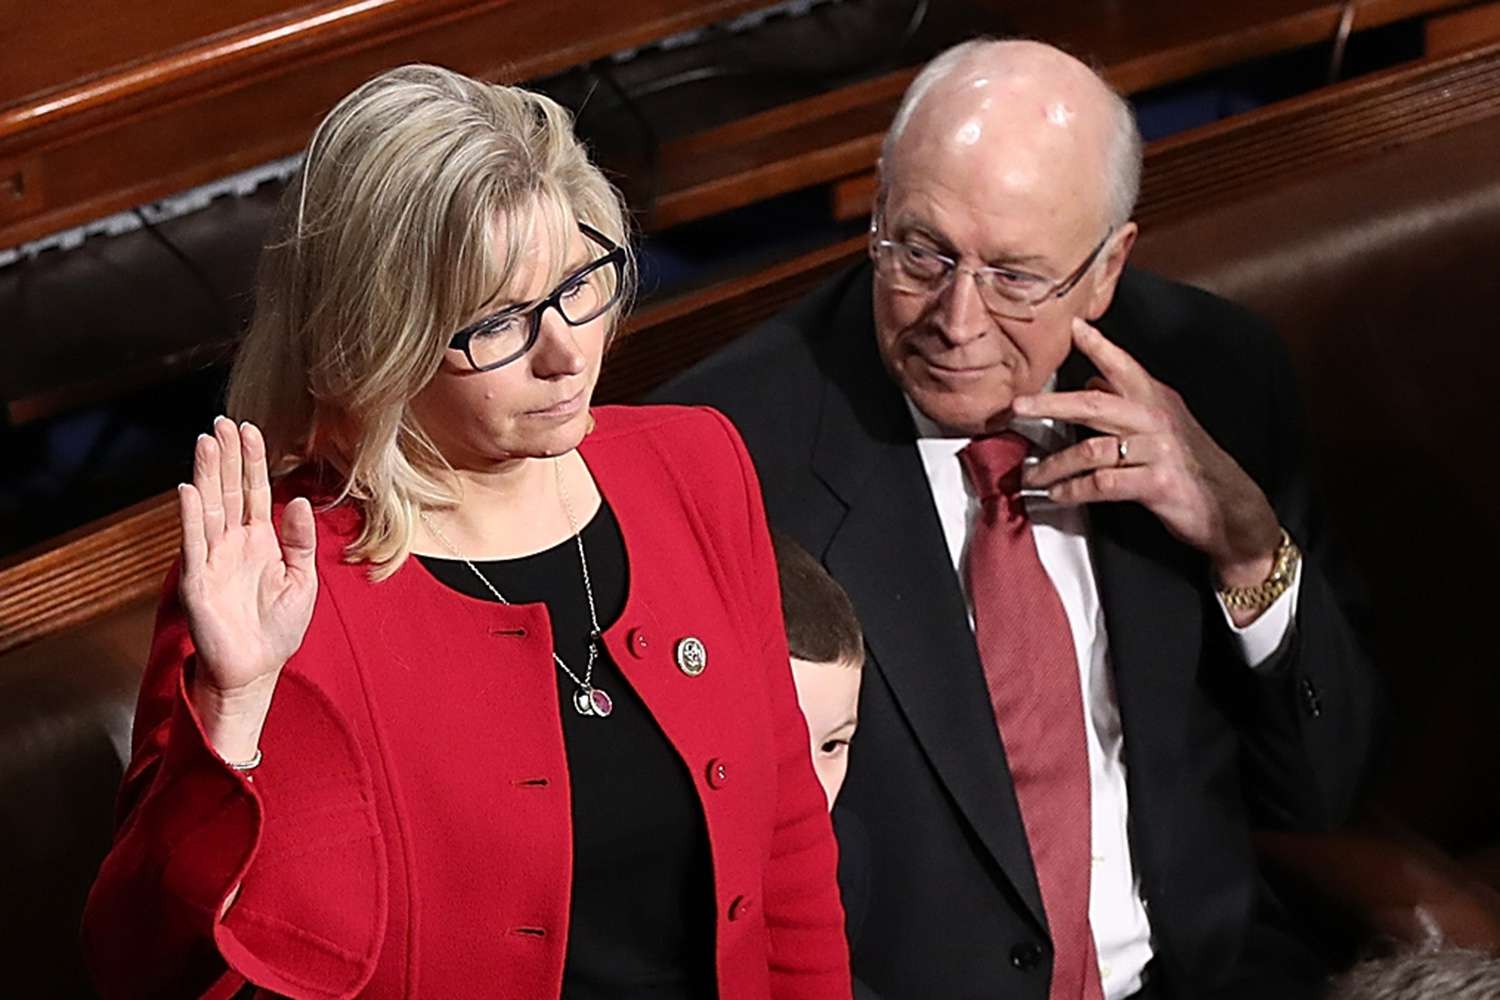 Liz and Dick Cheney Were the Only Republicans to Attend the House's Anniversary Observance of Jan. 6 暴動